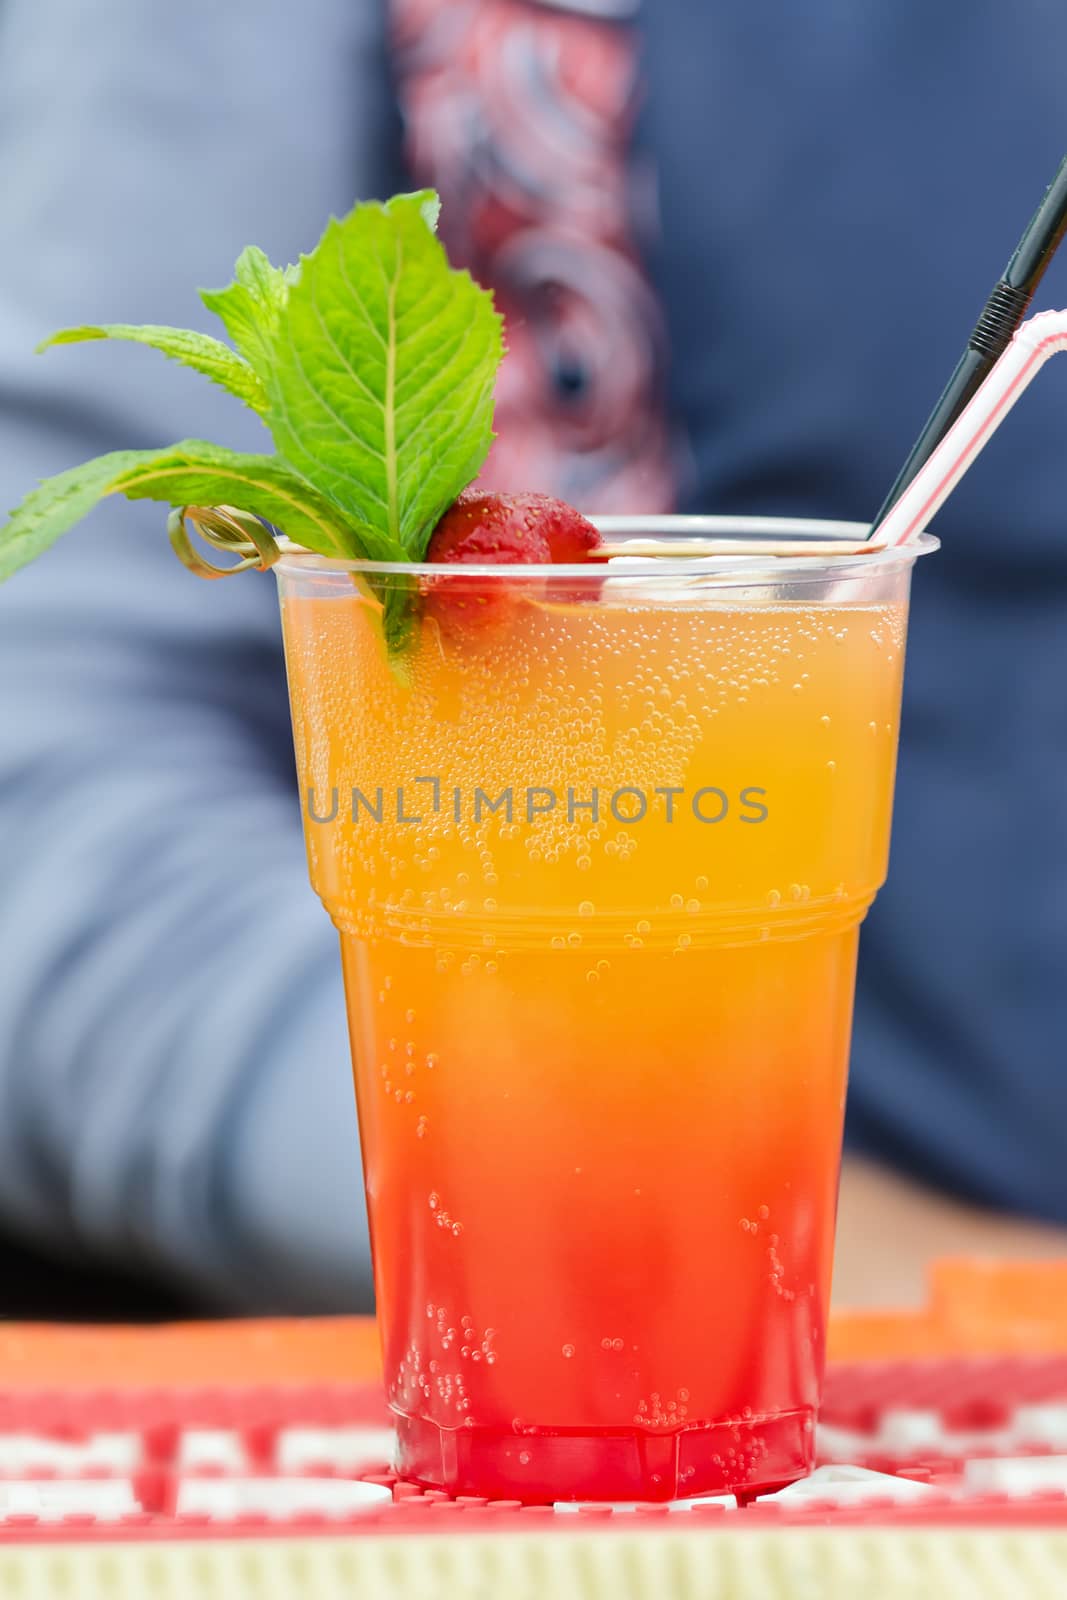 Cold cocktail with fruit pieces and air bubbles. Trade on the street.